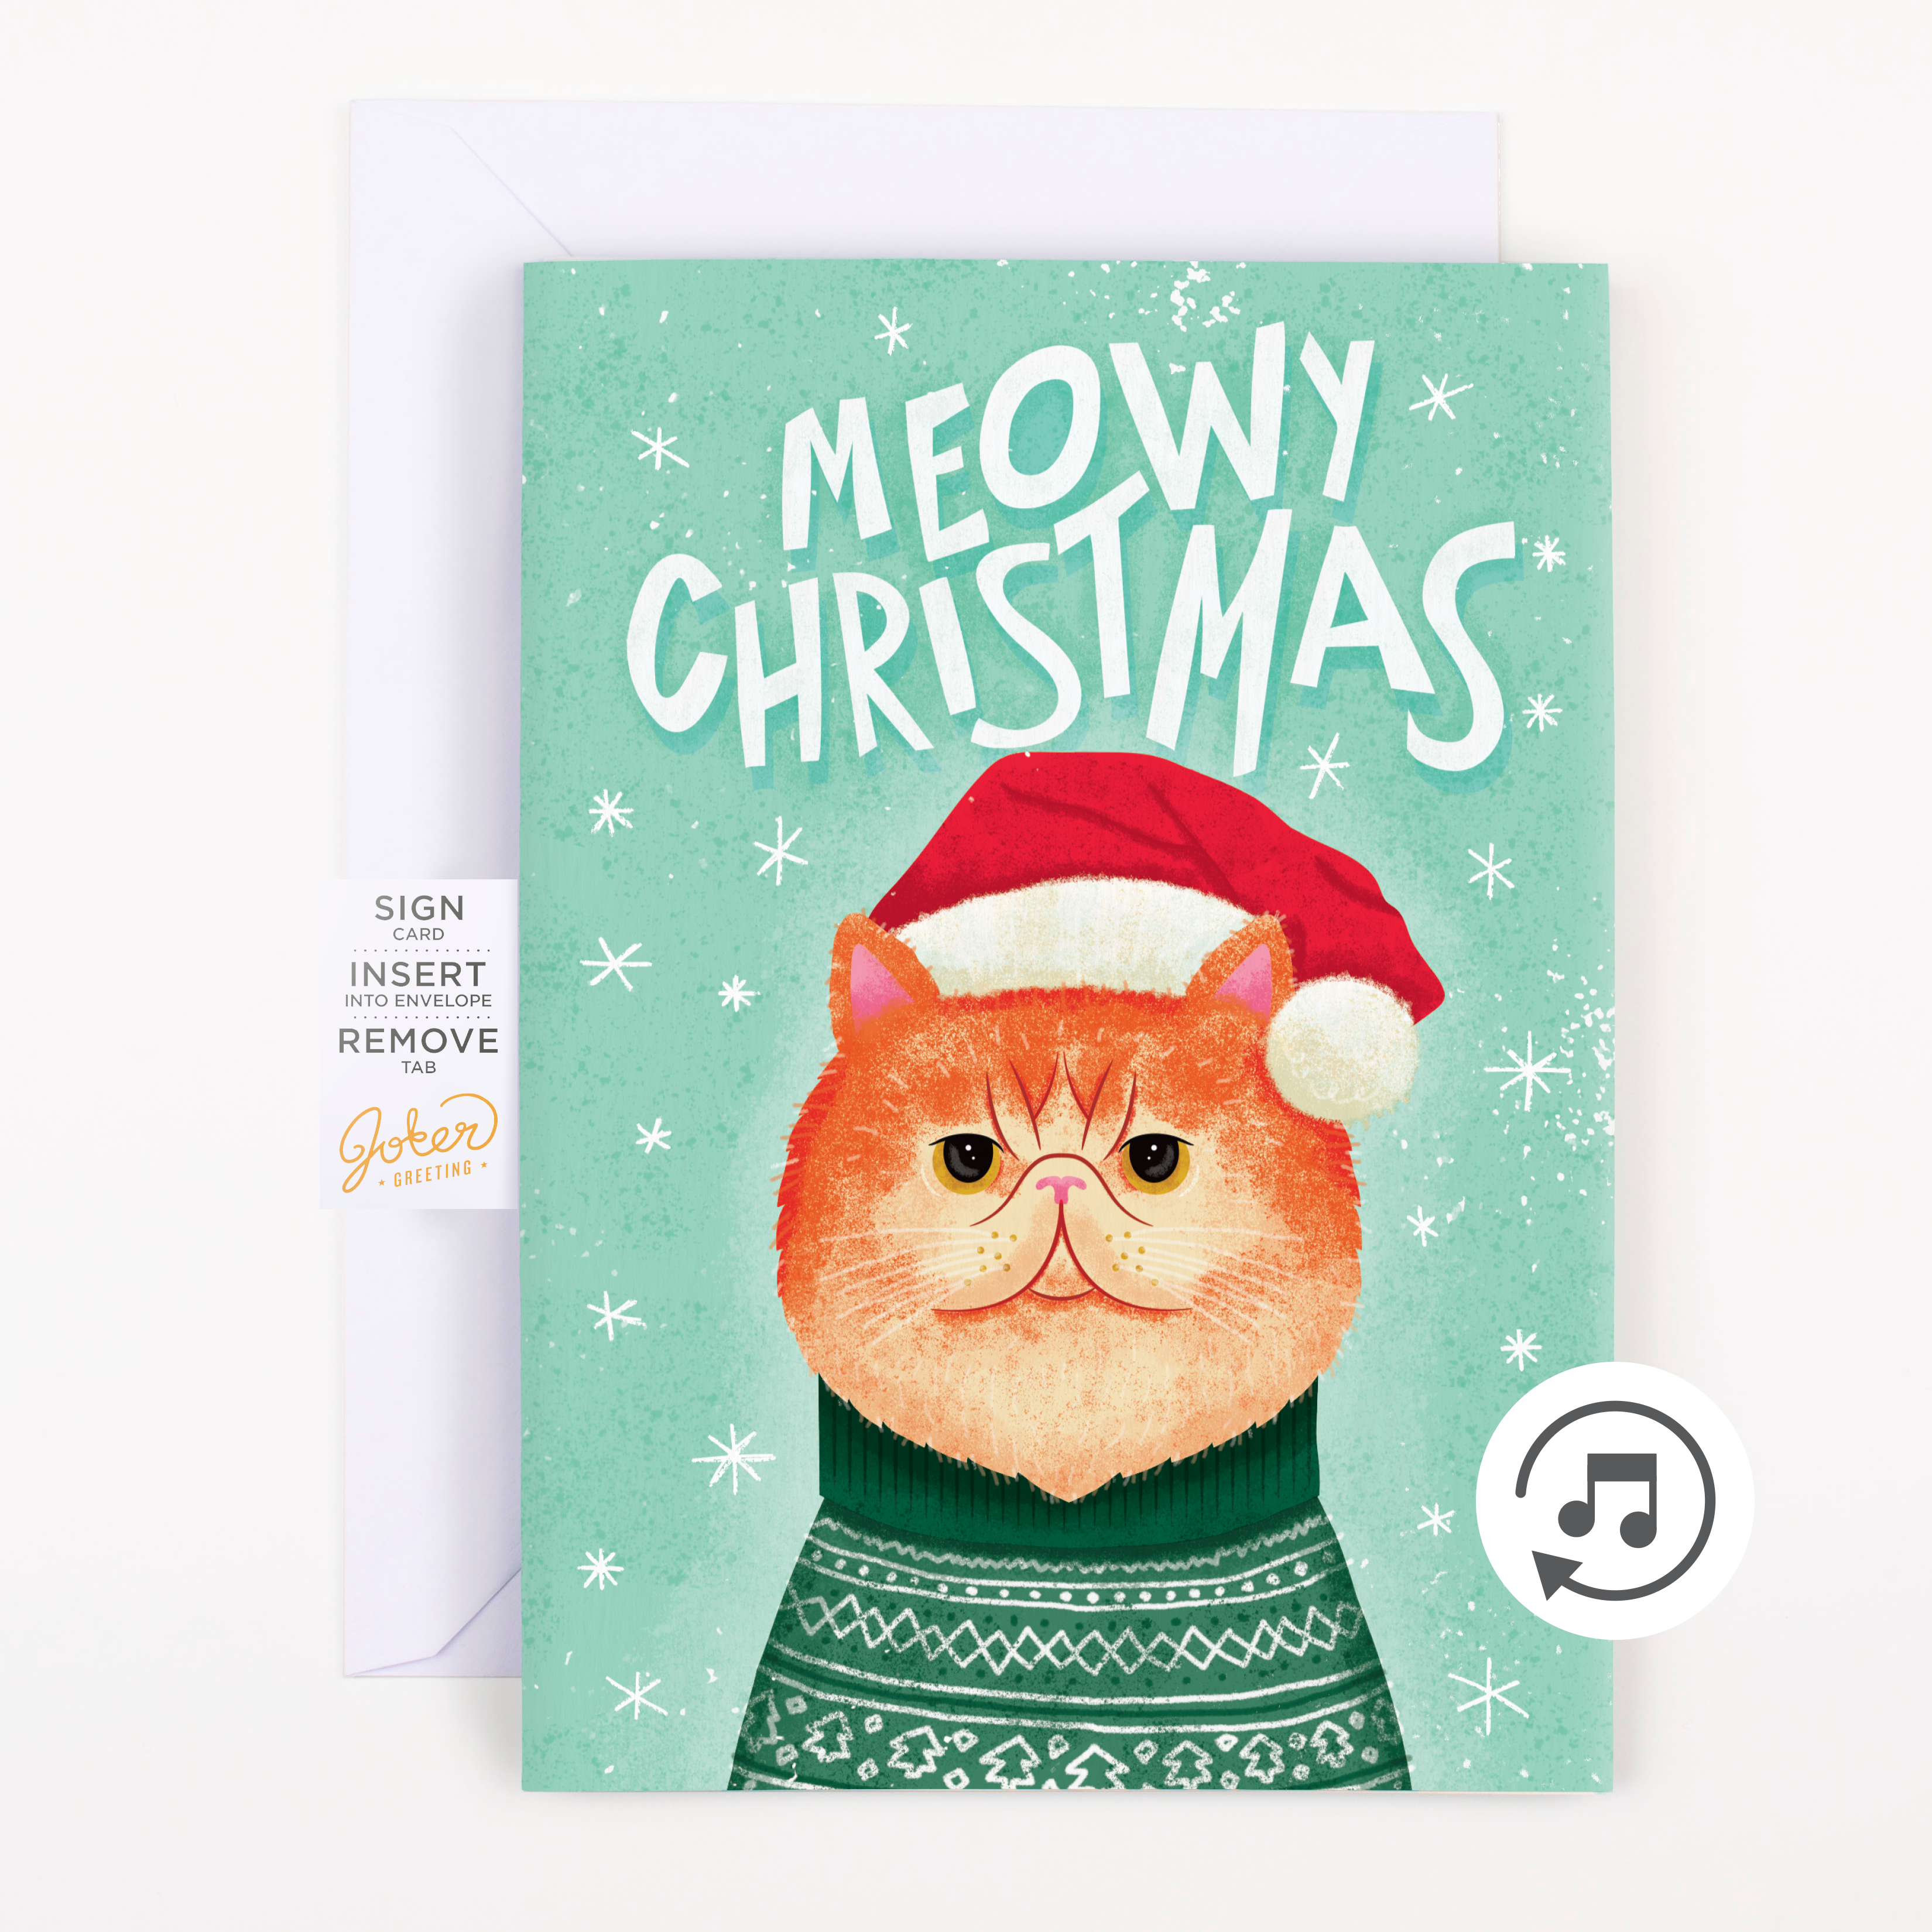 Is It Over Yet? Christmas Yeti | Greeting Card